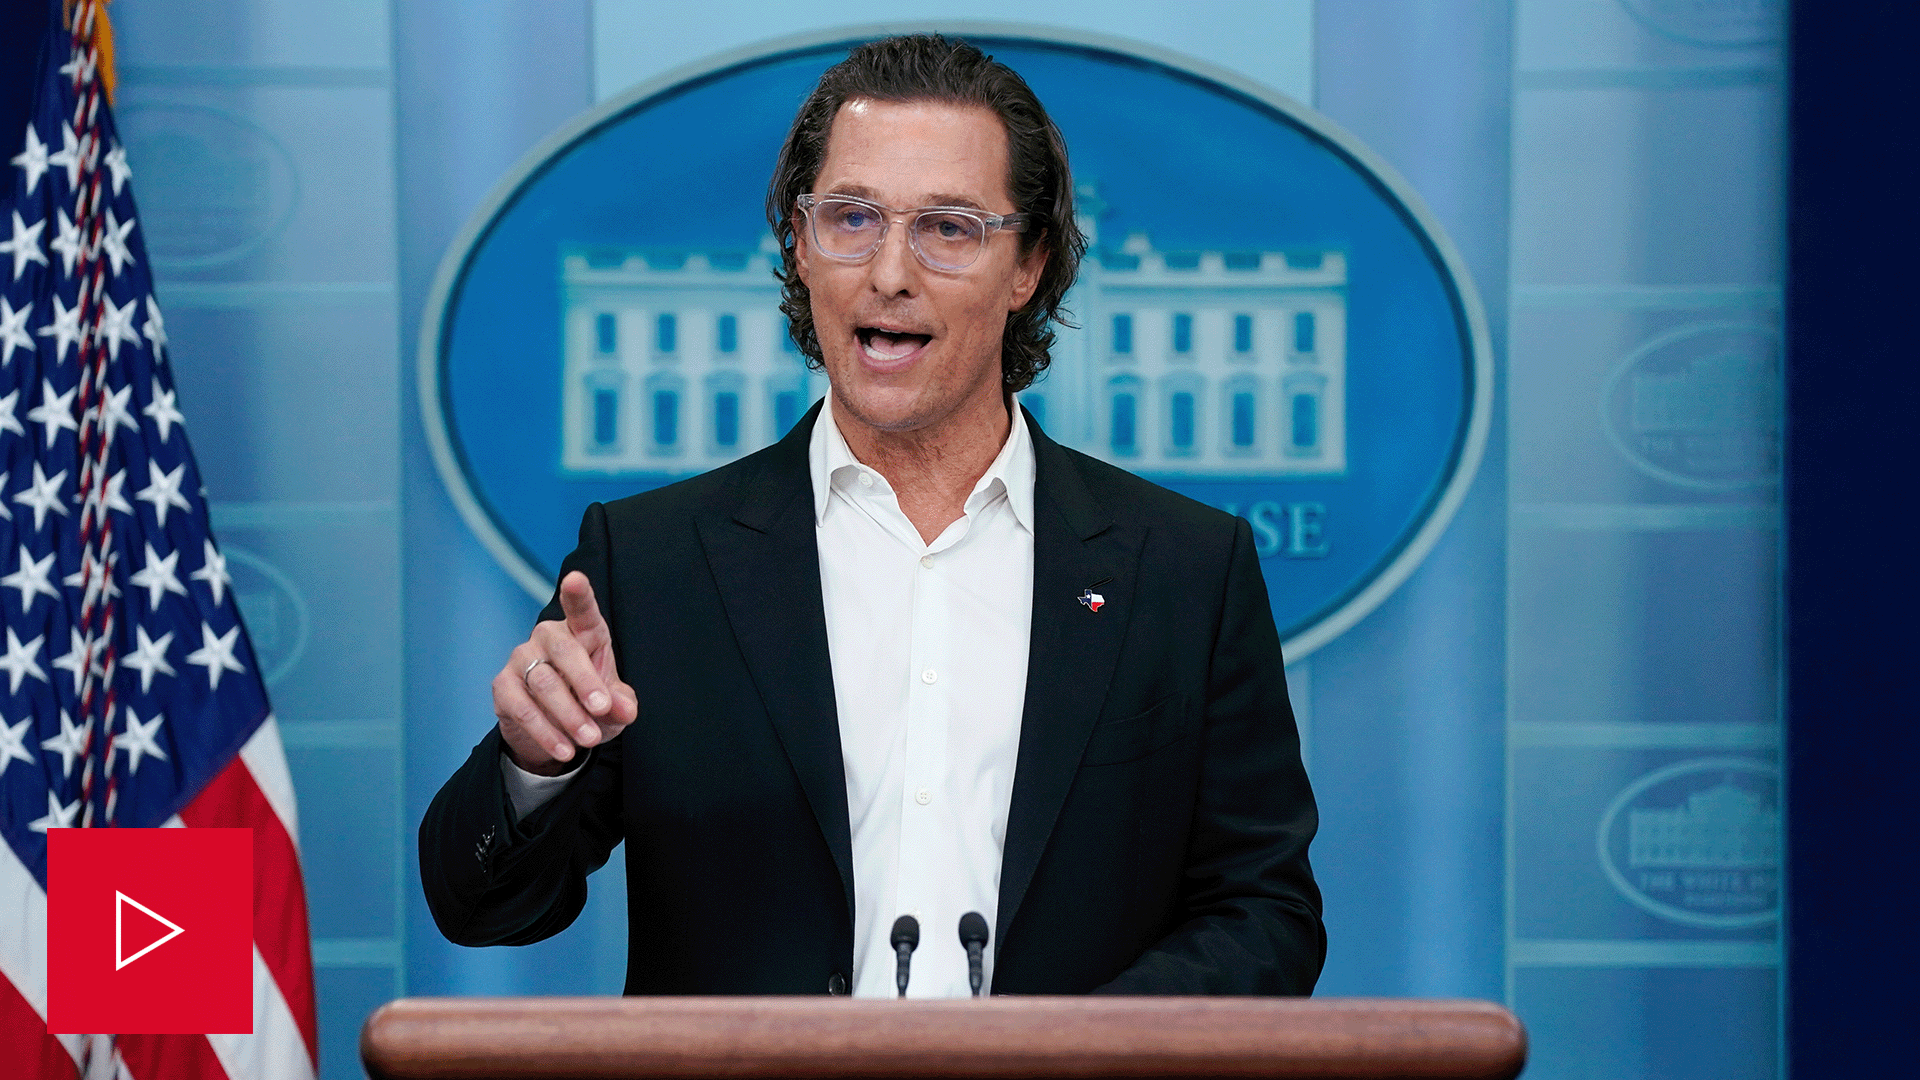 Matthew McConaughey speaks at the White House daily briefing.